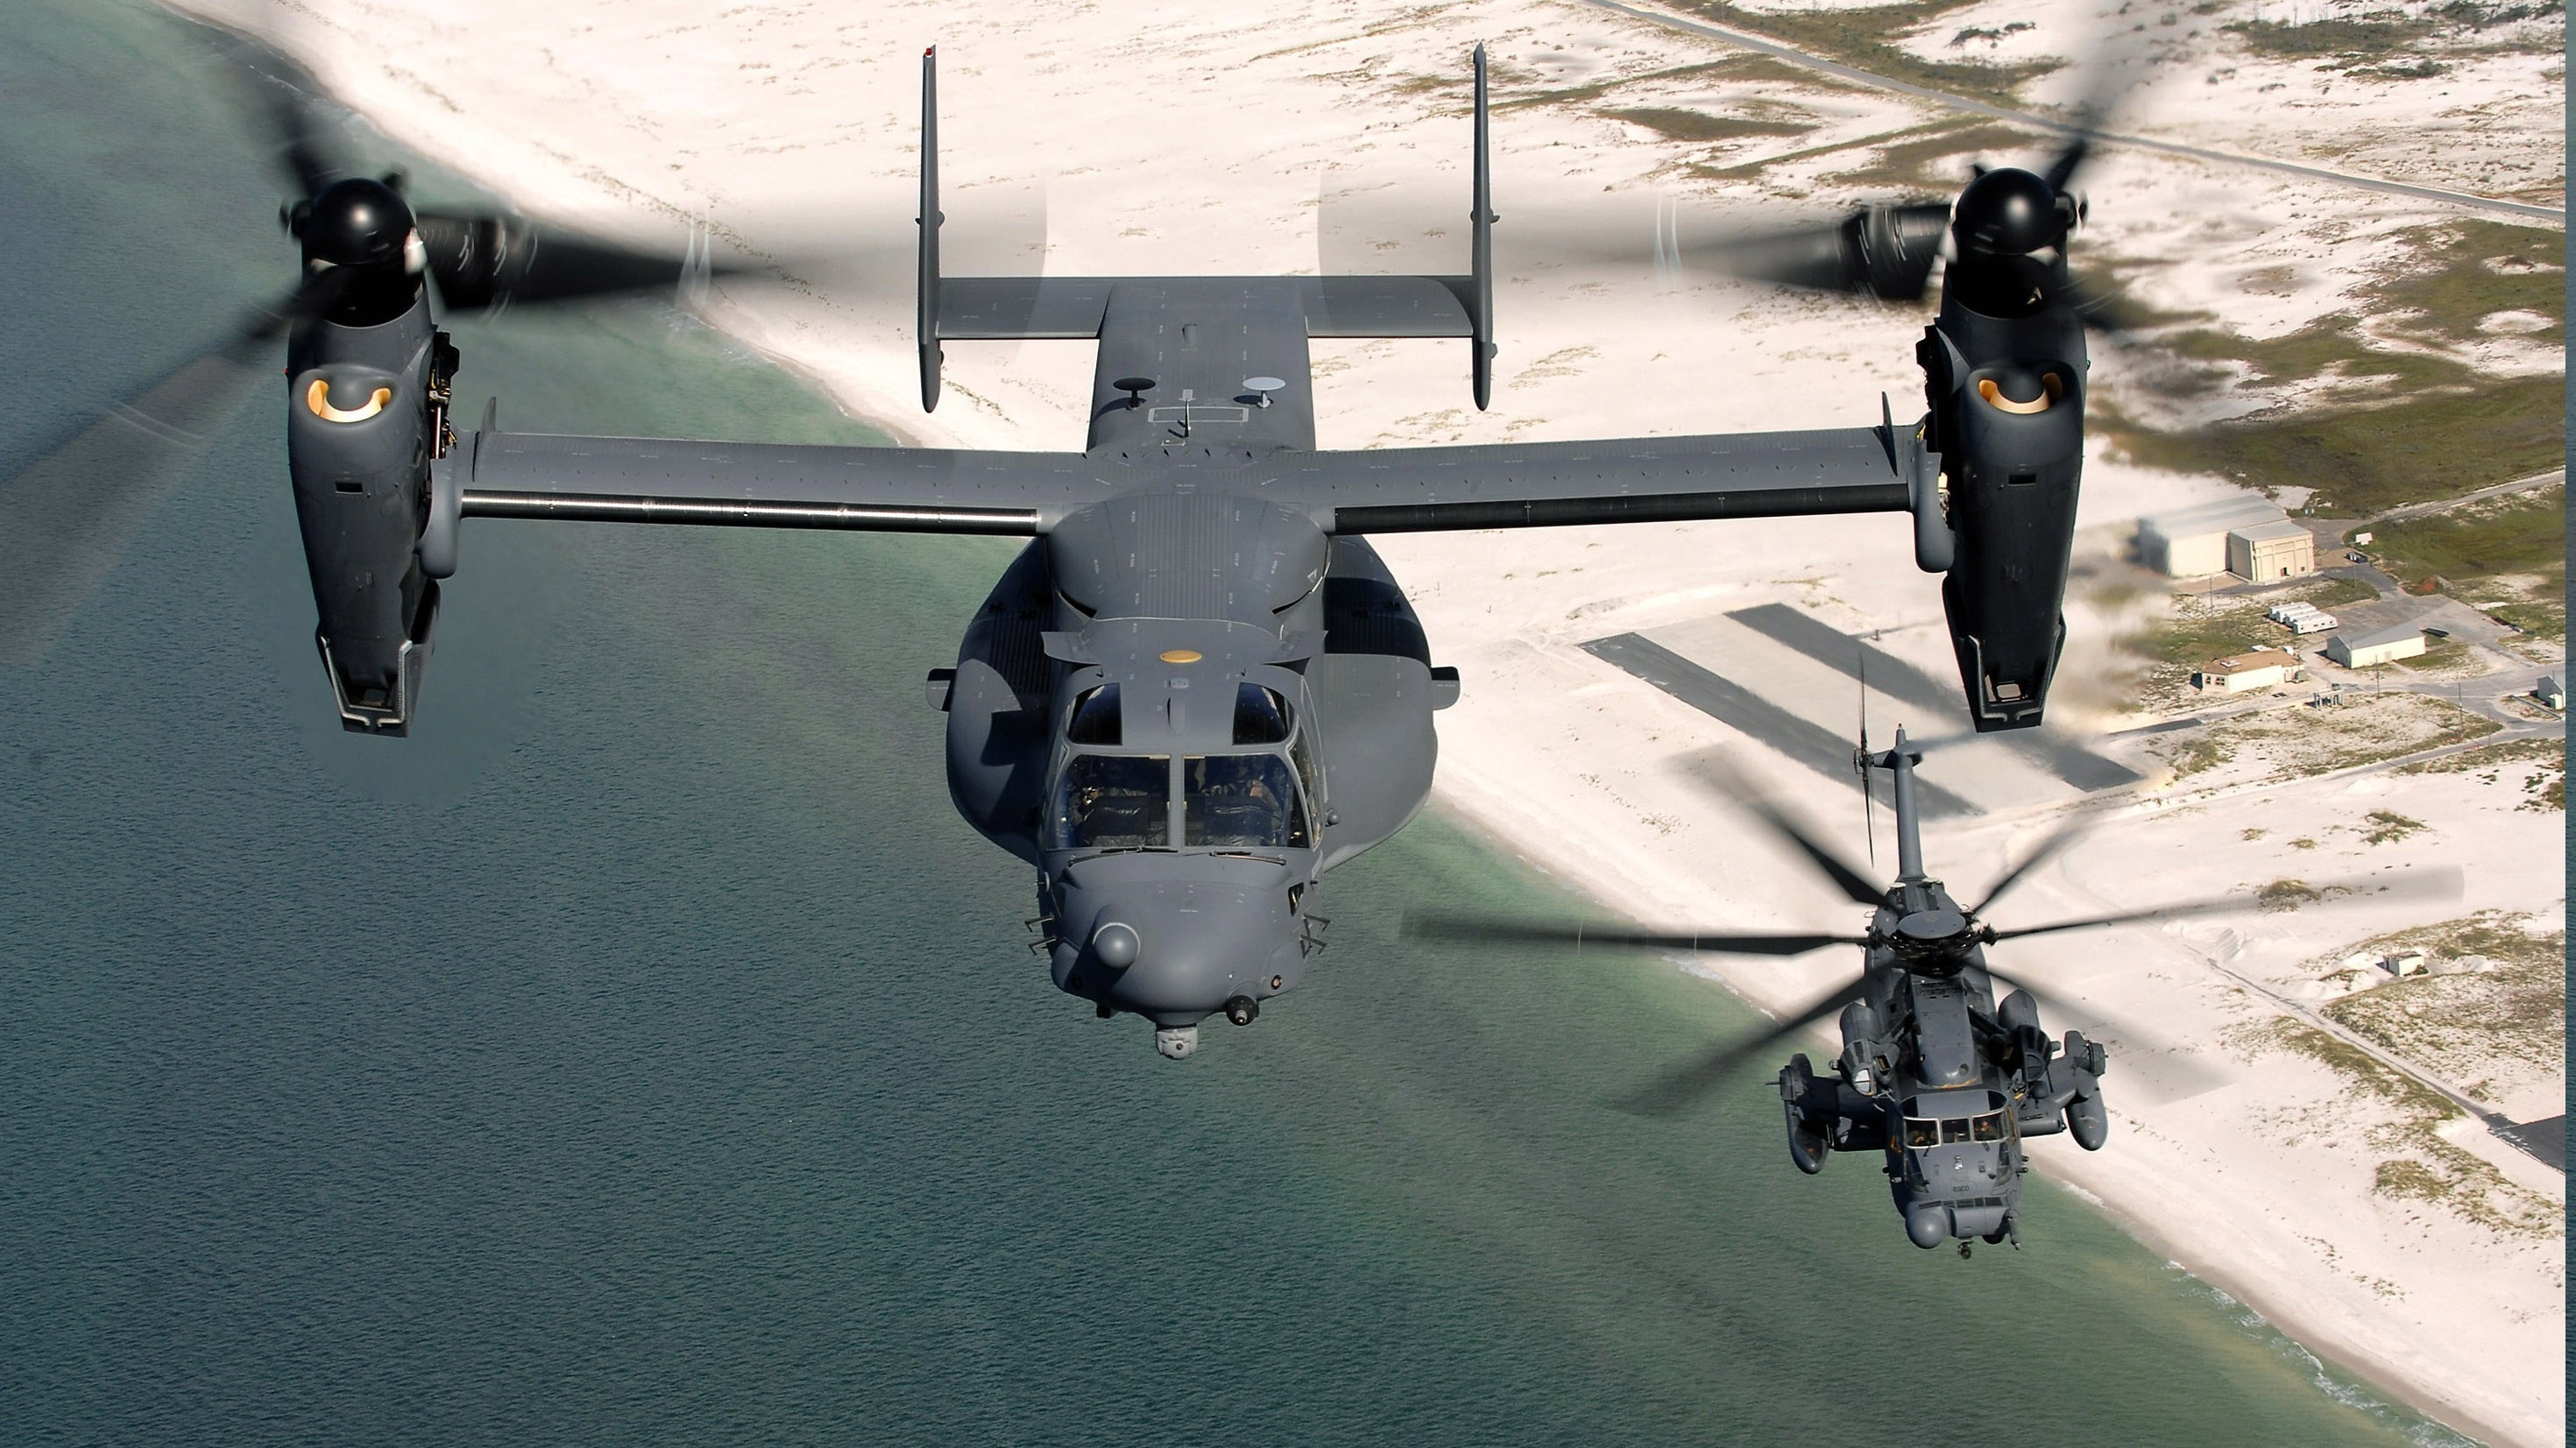 V-22 Osprey, Military aircraft, Helicopter wallpapers, RC helicopter excitement, 2940x1660 HD Desktop